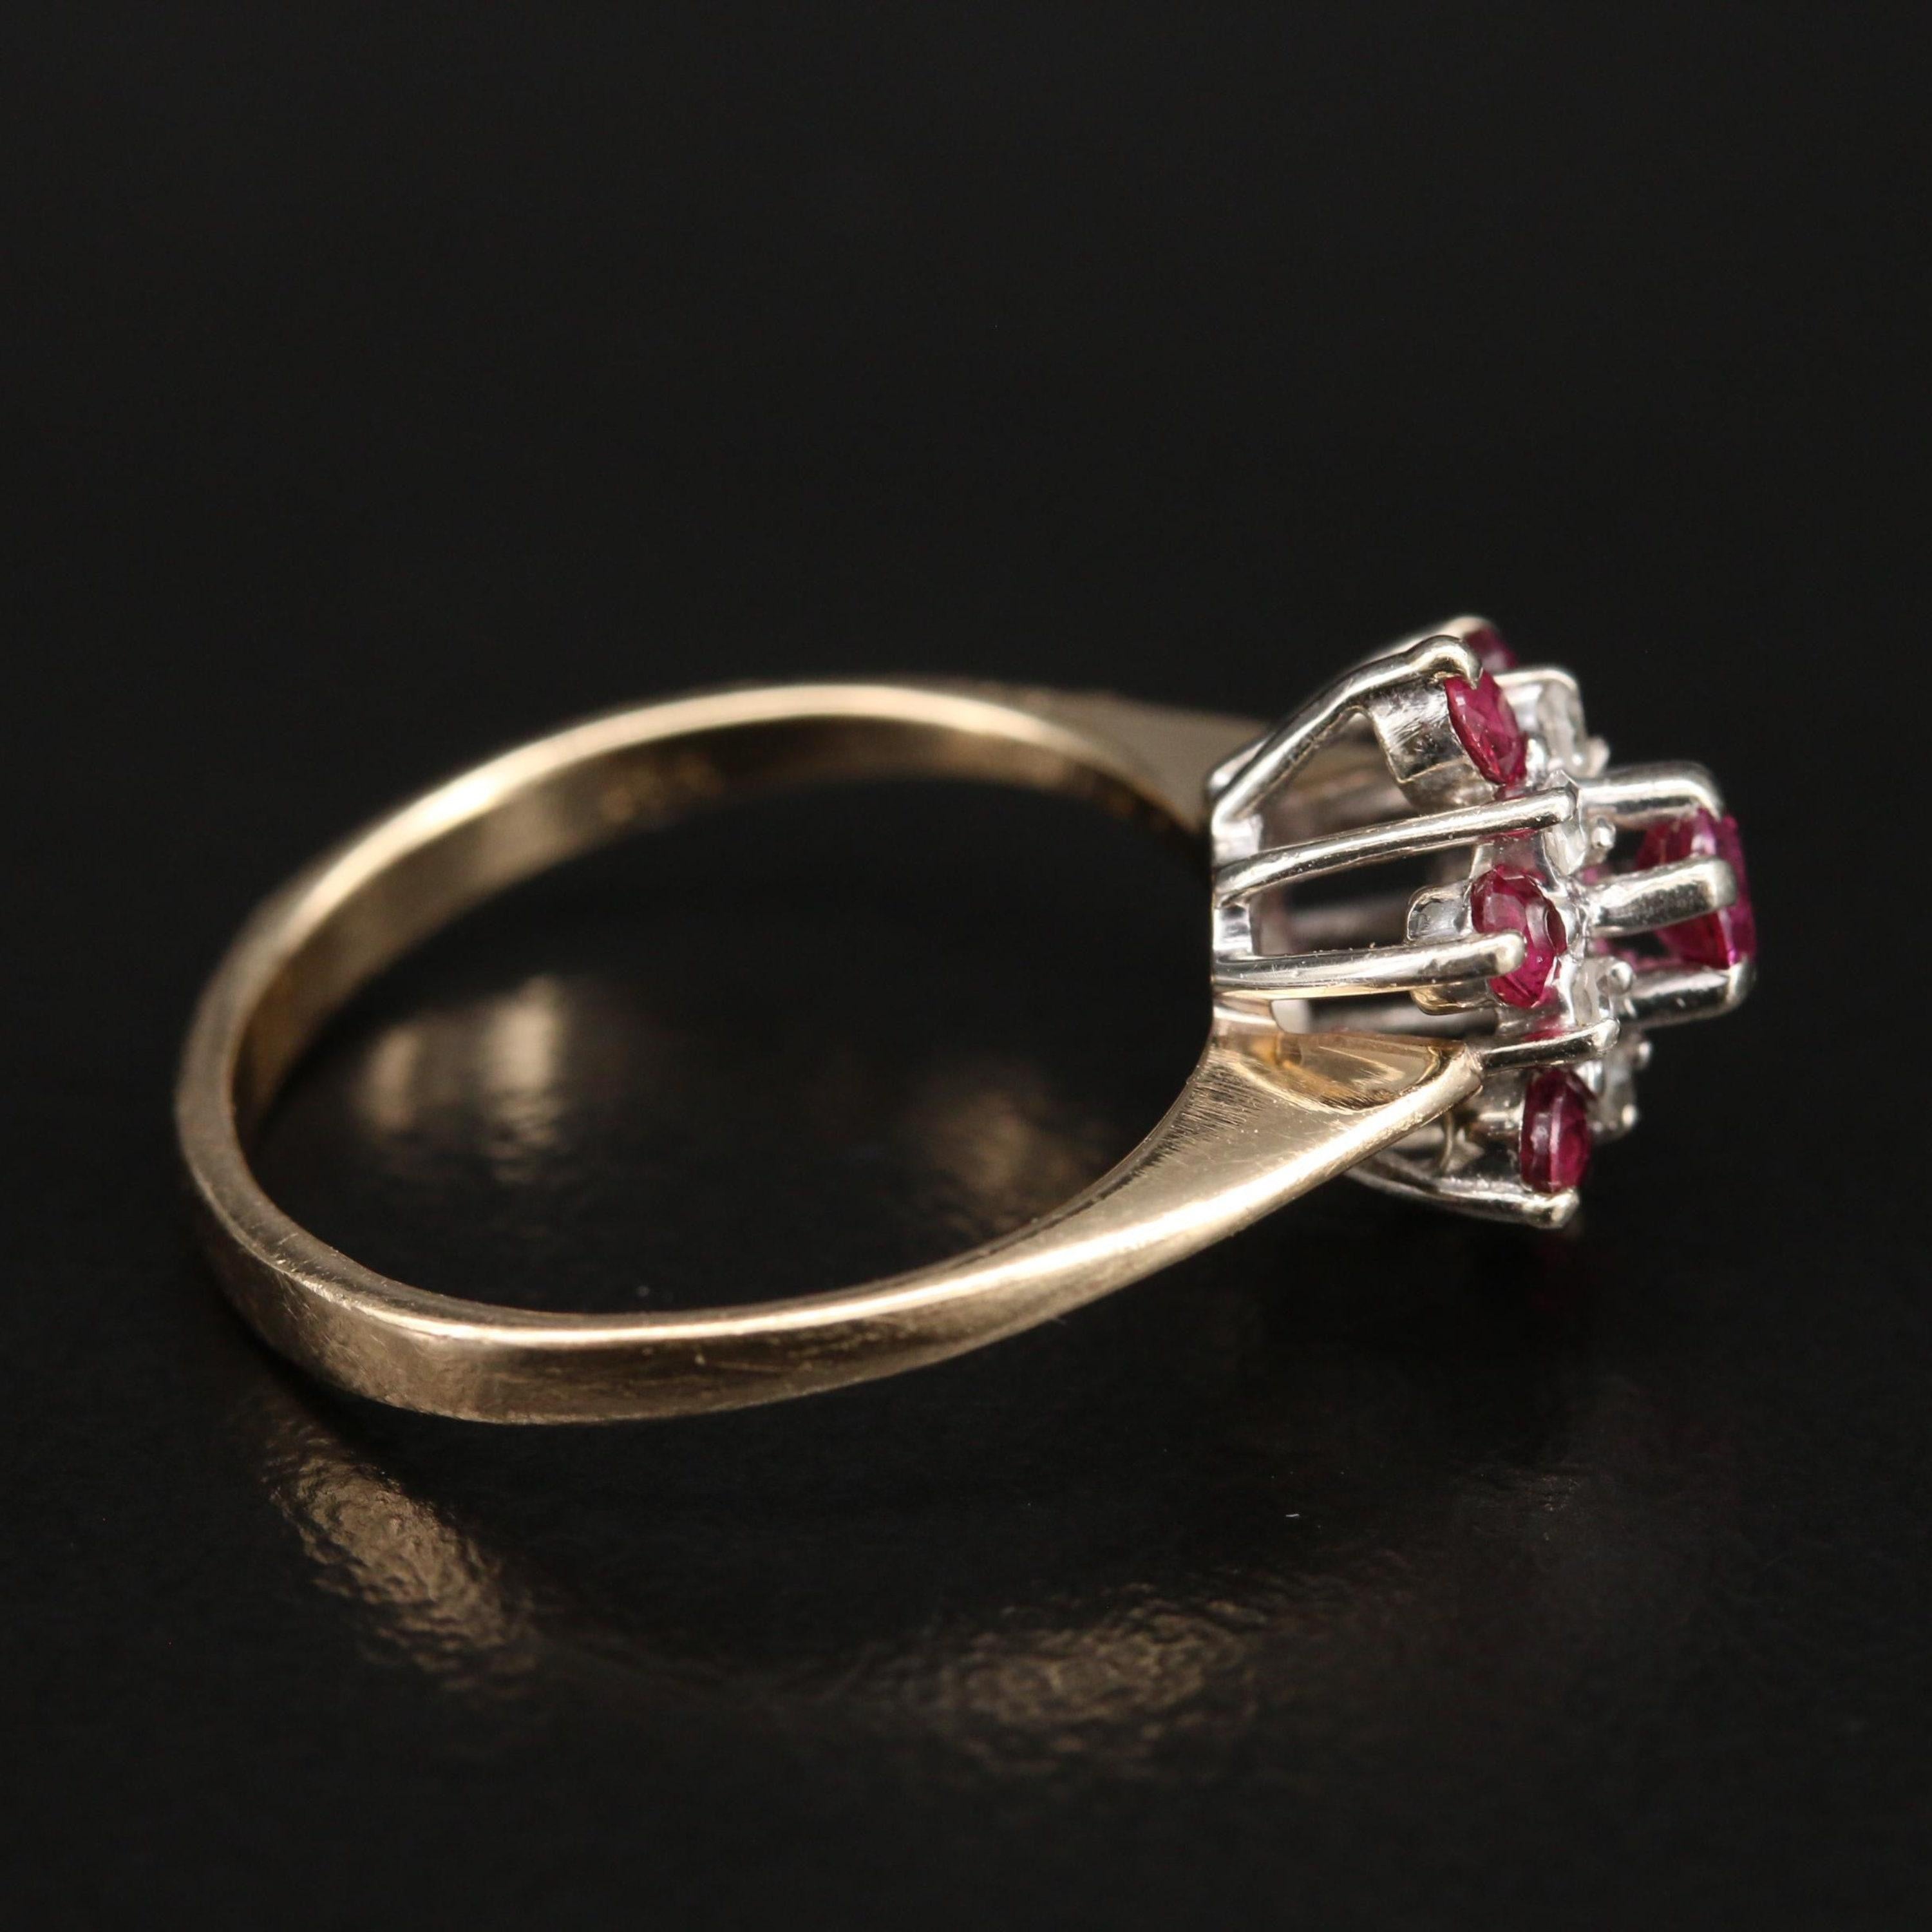 For Sale:  Antique Star Ruby Engagement Ring, Art Deco Floral Ruby Diamond Wedding Ring 6